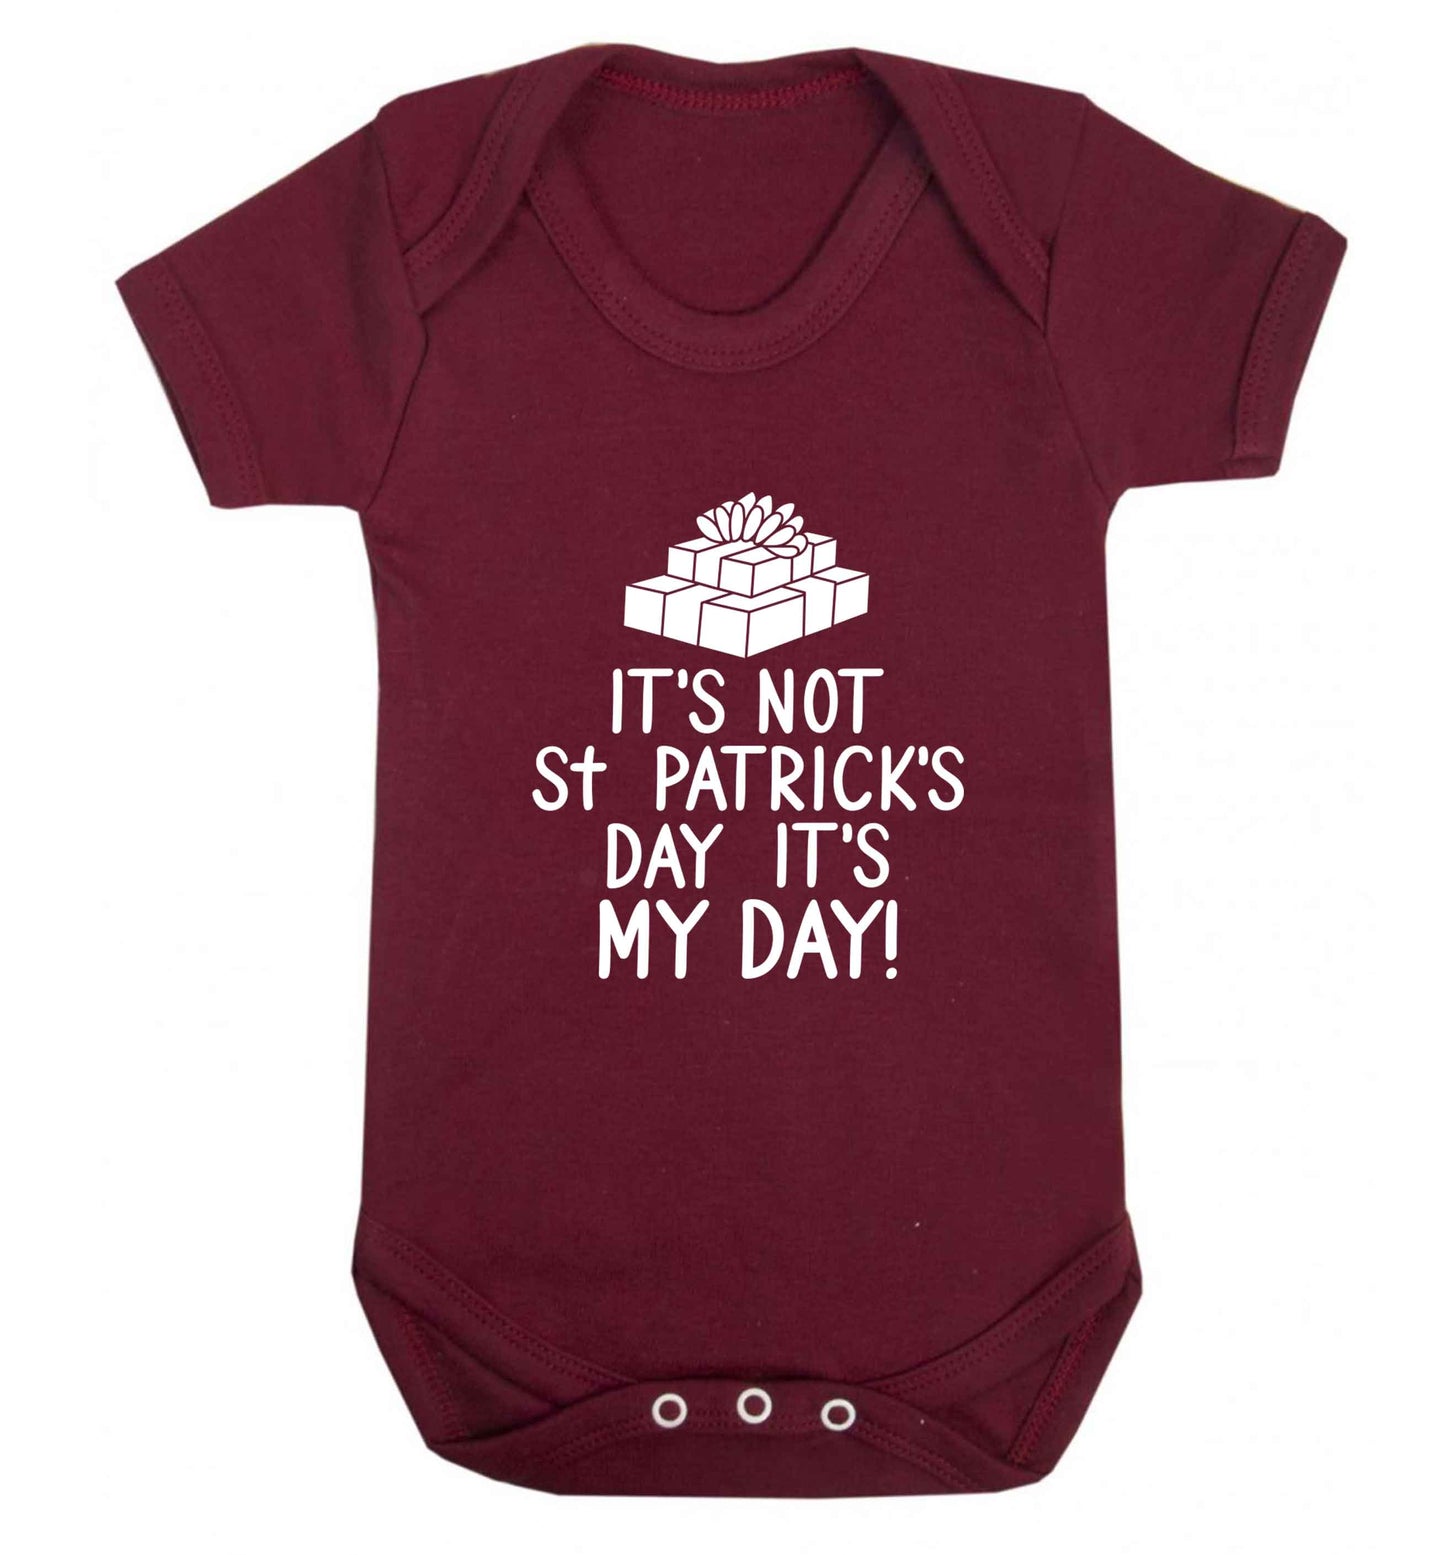 Funny gifts for your mum on mother's dayor her birthday! It's not St Patricks day it's my day baby vest maroon 18-24 months